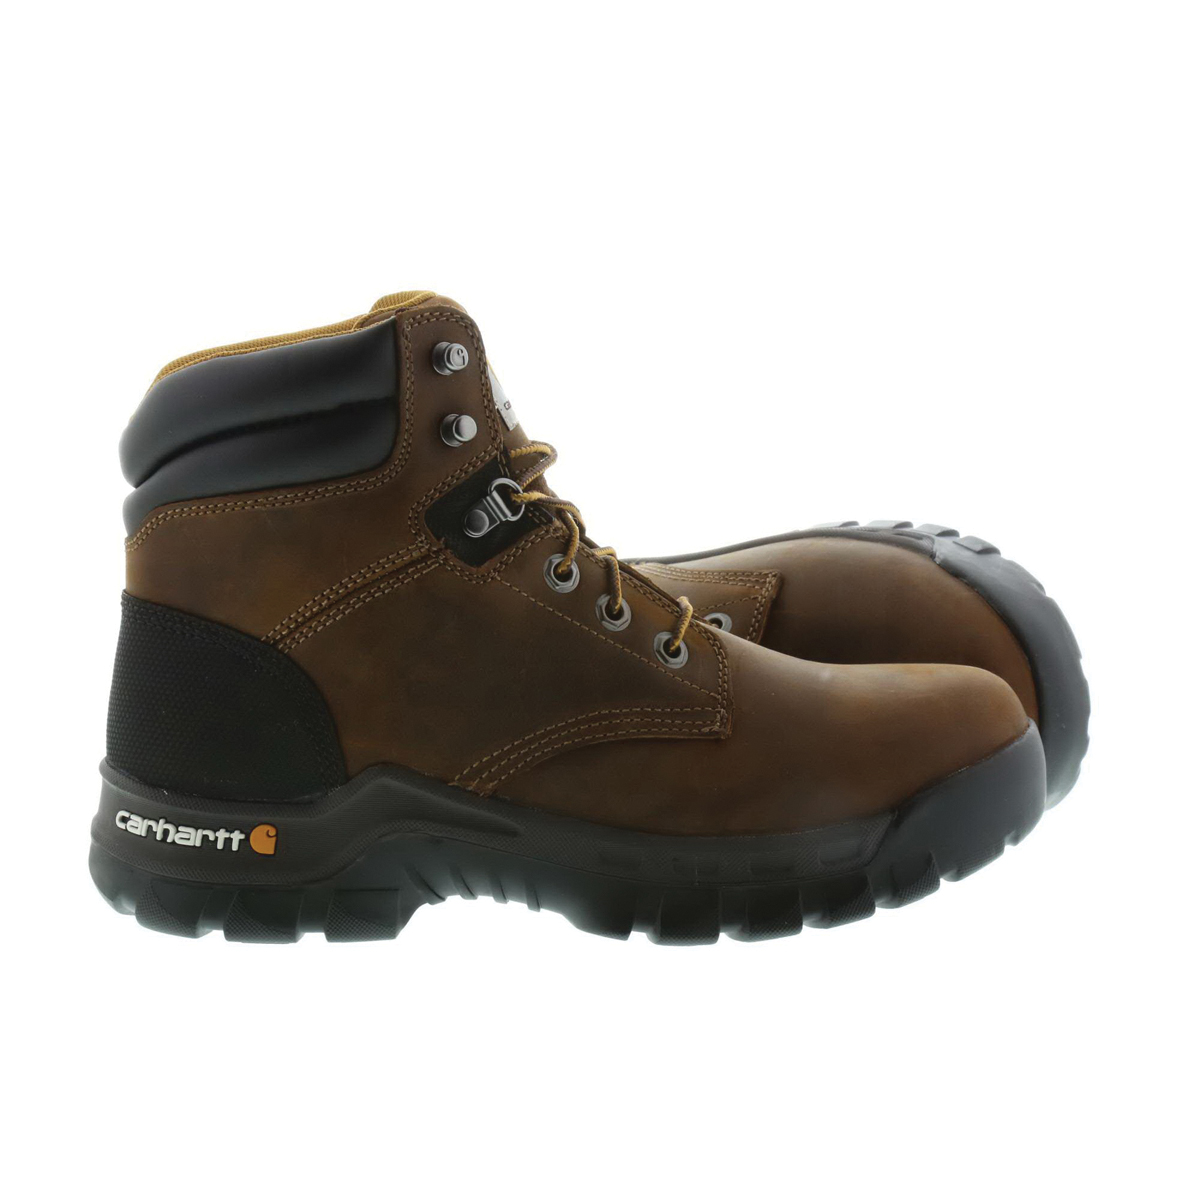 Carhartt CMF6366-BOD-12M Work Boots, 12, M W, Brown Oil Tanned, Leather Upper, Lace-Up Closure - 3